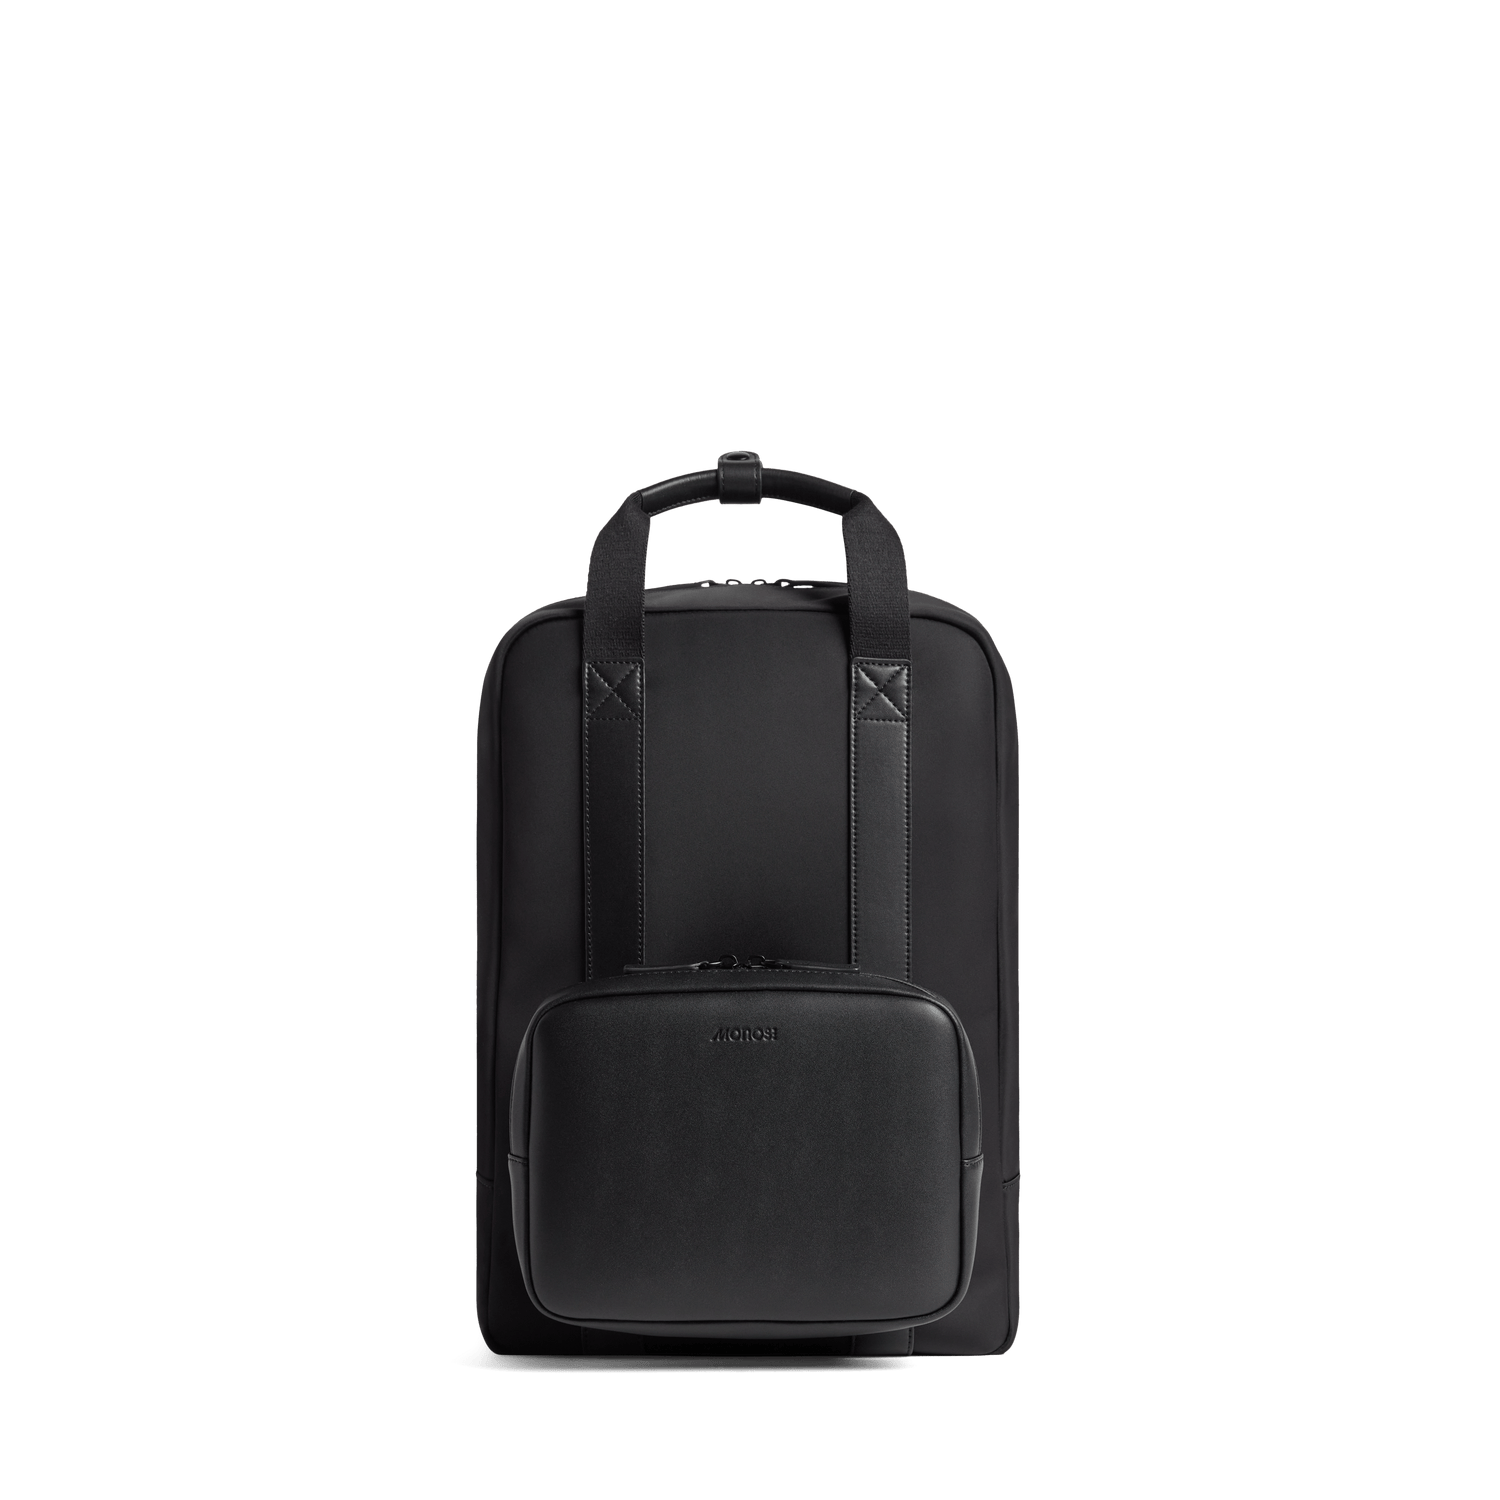 Carbon Black Scaled | Front view of Metro Backpack Carbon Black